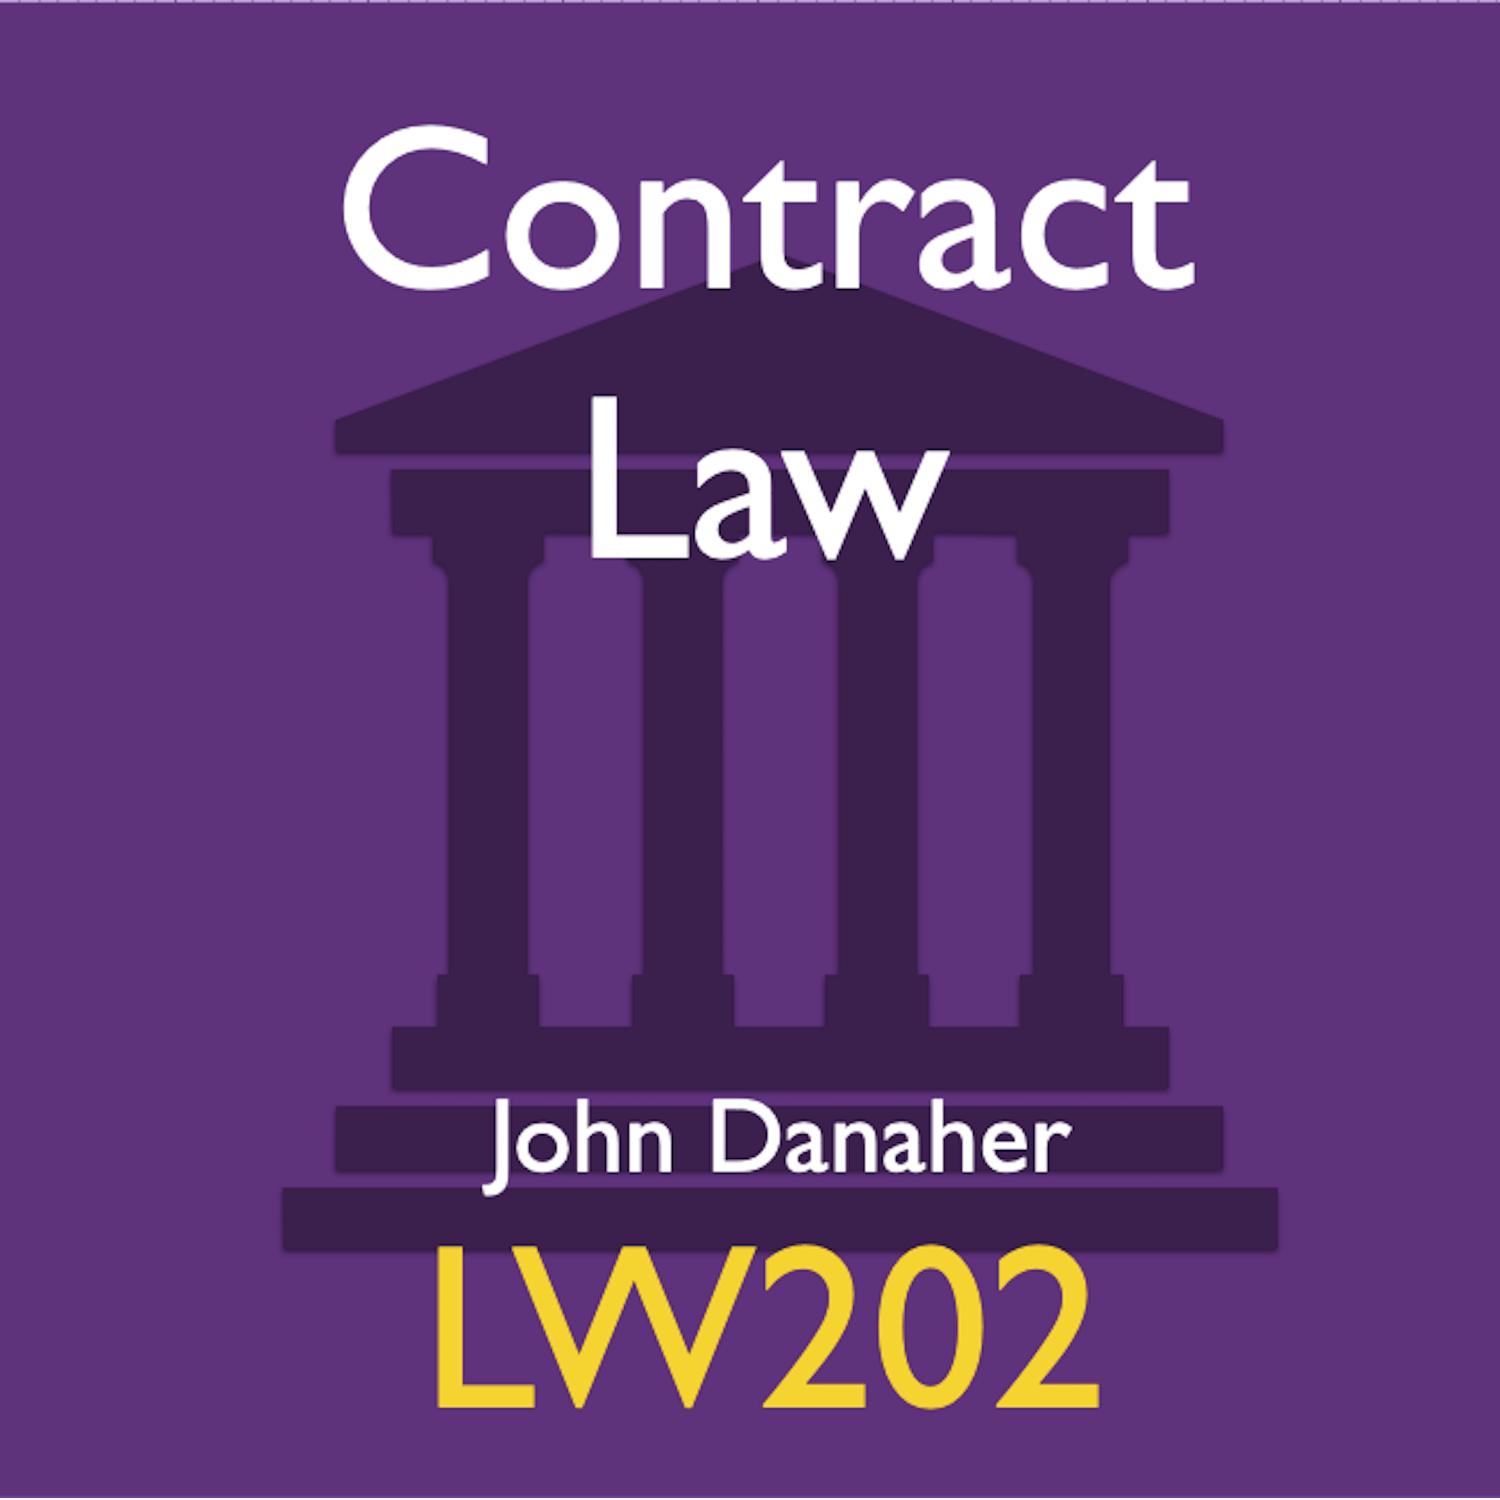 Contract Law - LW202 Podcast artwork